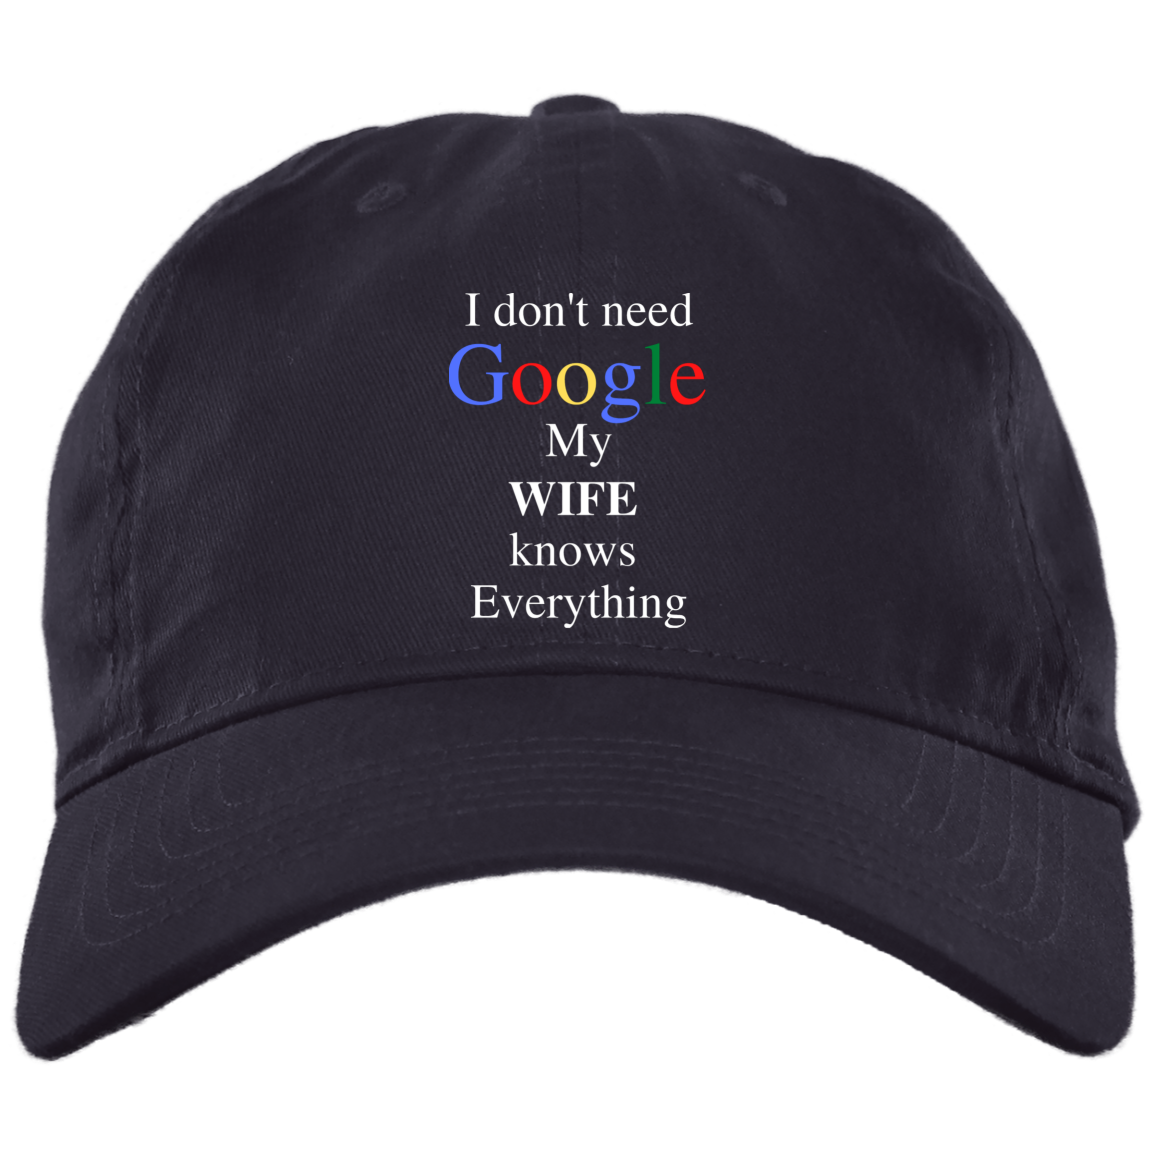 GOOGLE WIFE Embroidered Brushed Twill Unstructured Dad Cap